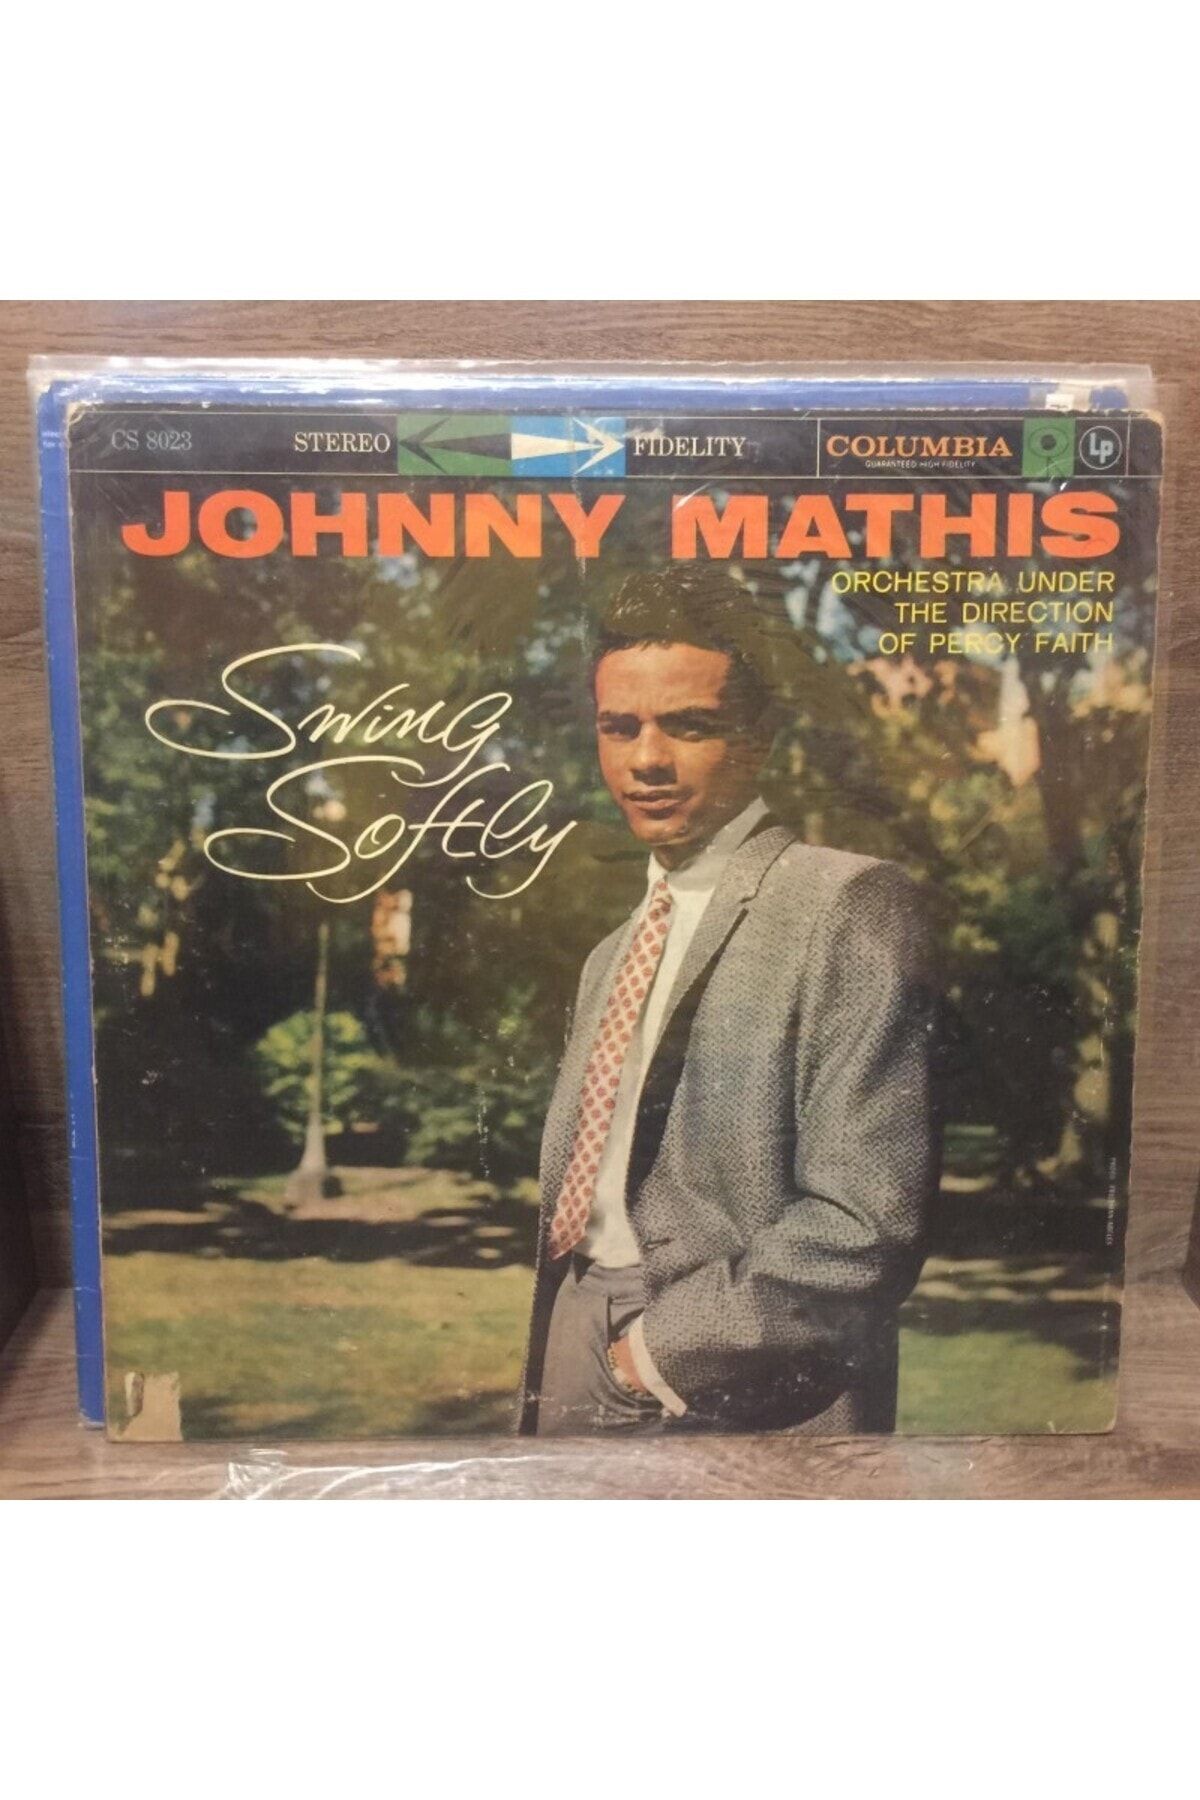 Vinylium Zone Johnny Mathis – Swing Softly with Percy Faith and His Orchestra Vinyl, LP Plak